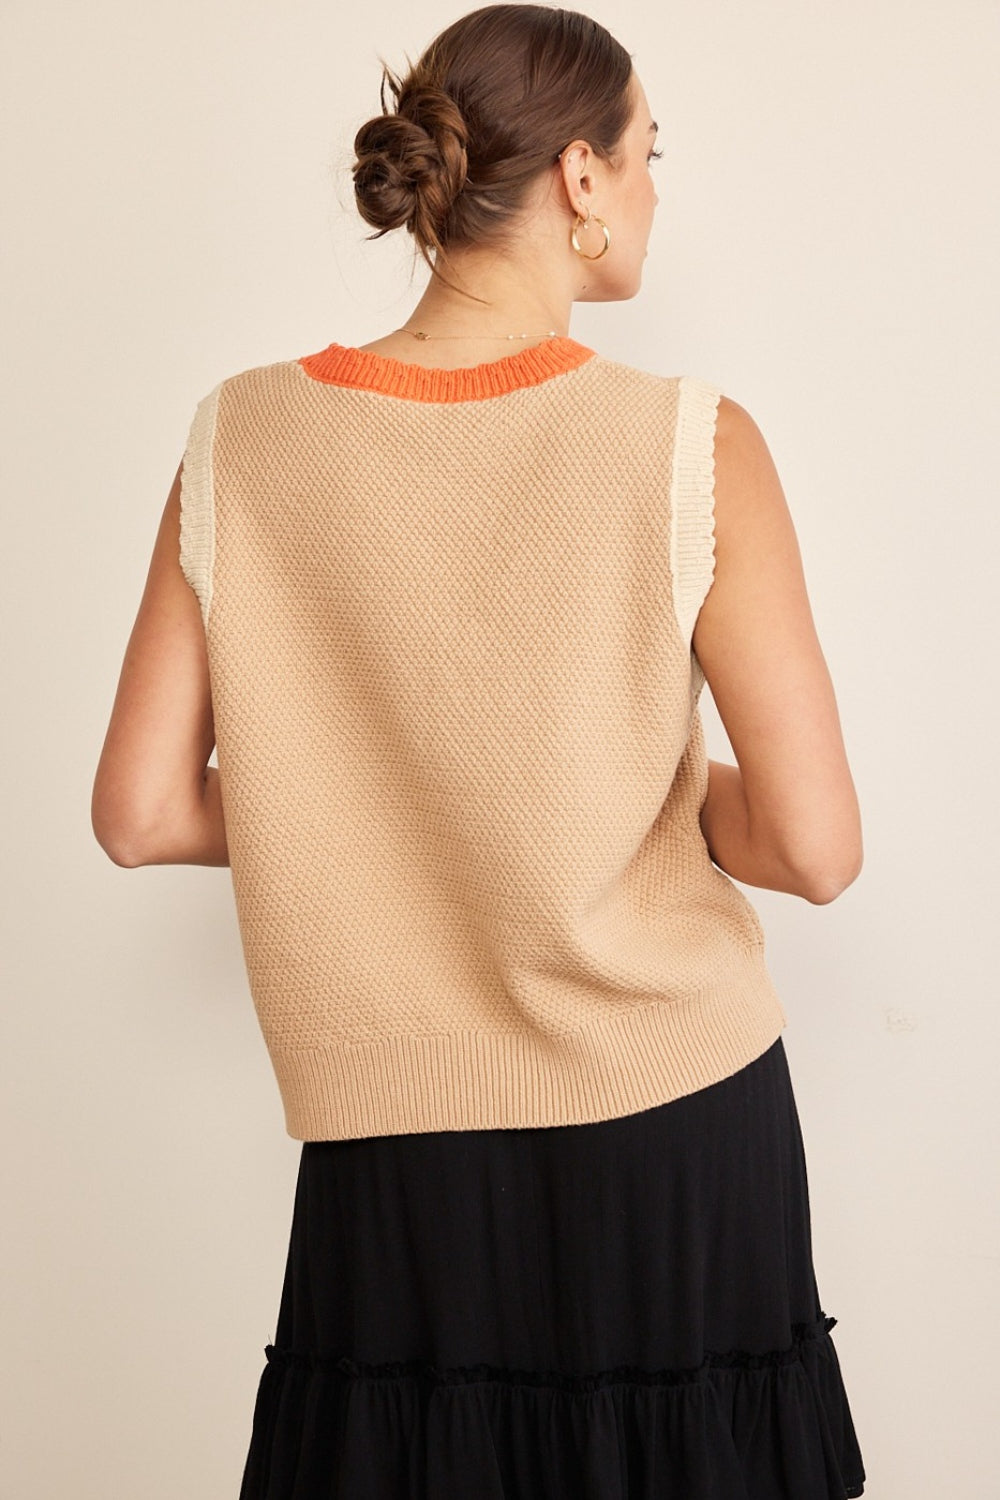 In February Contrast Round Neck Sweater Vest